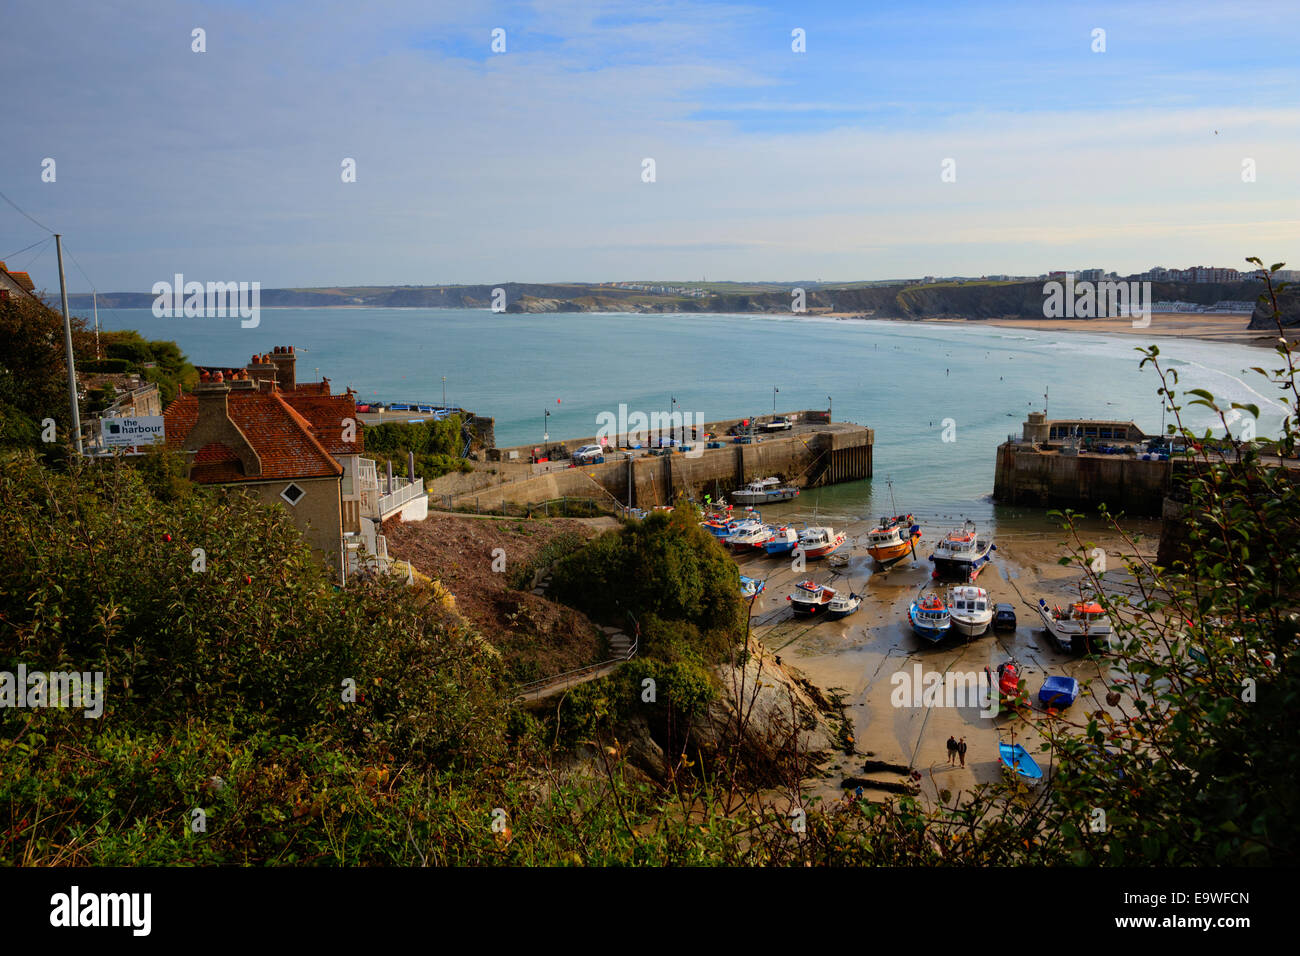 Newquay harbour North Cornwall England UK with boats and sandy beach Stock Photo